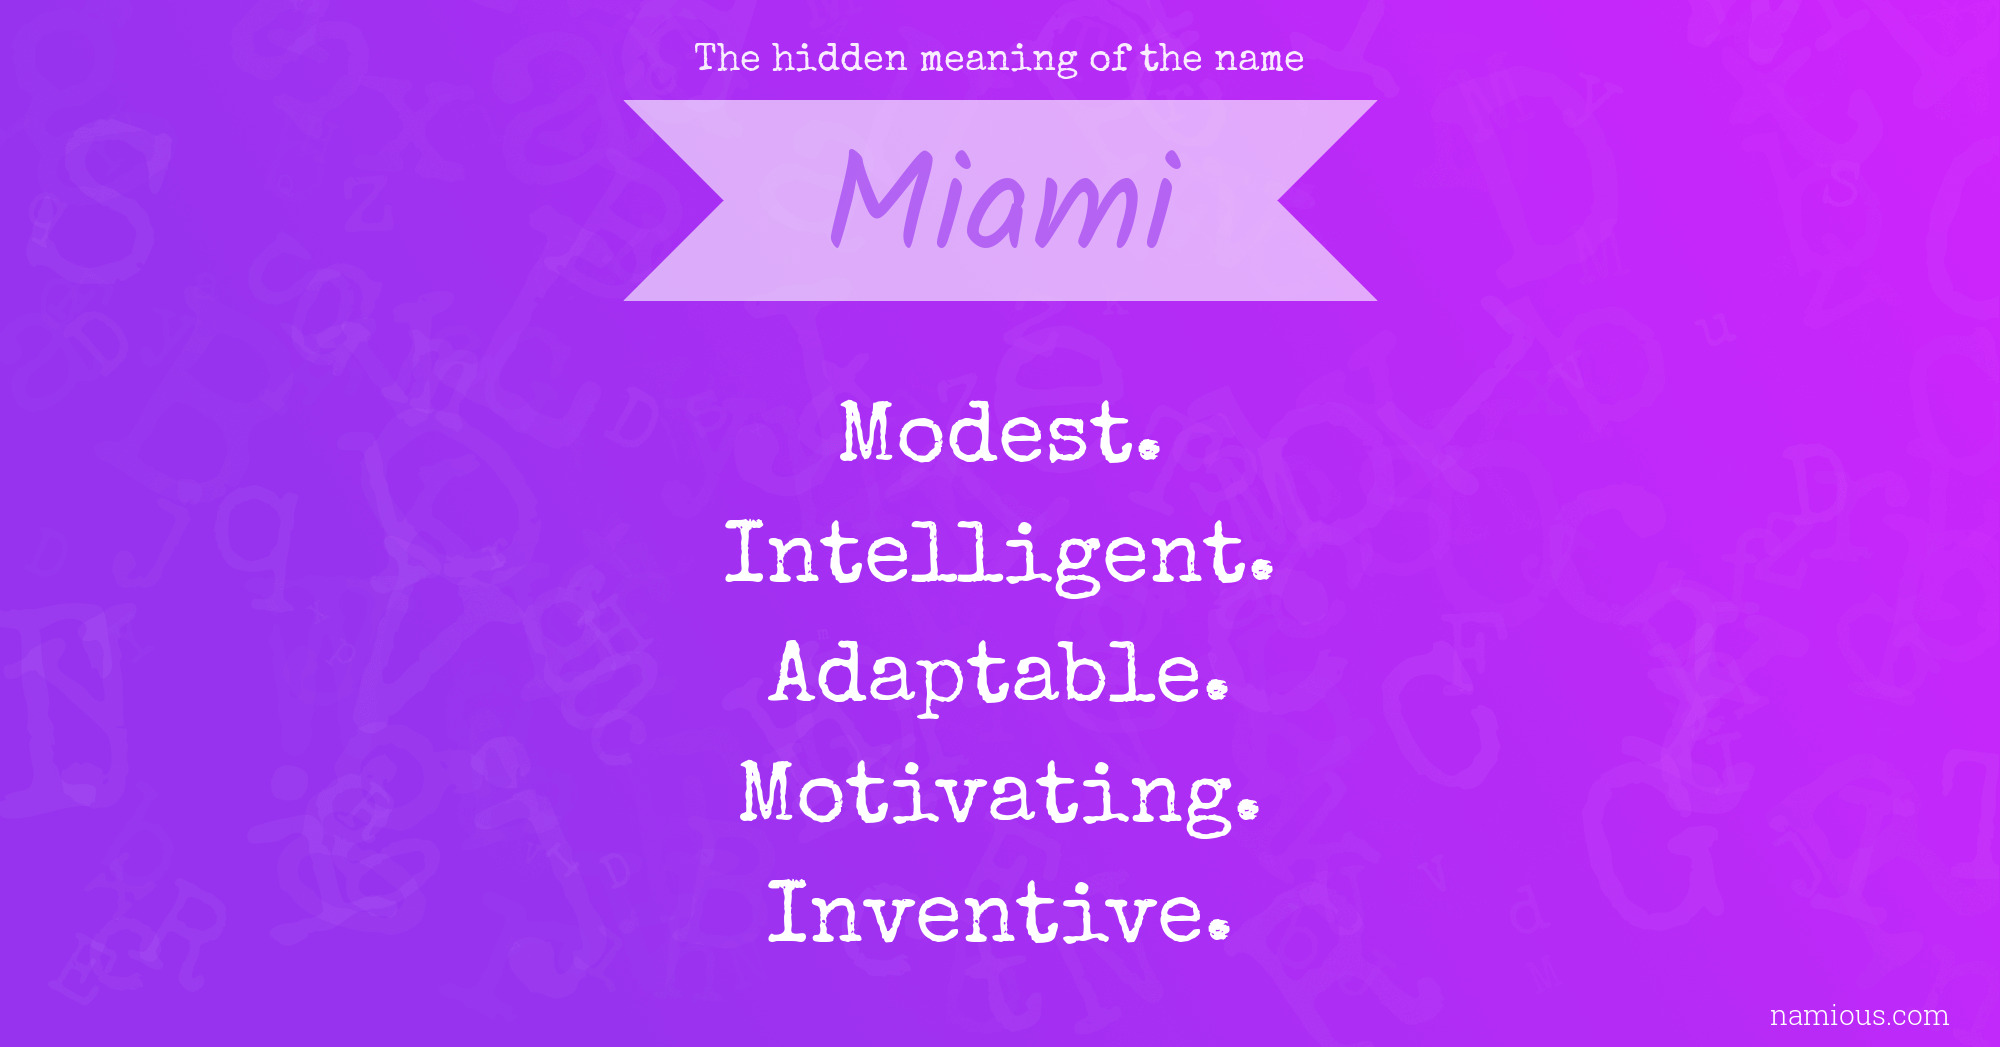 The hidden meaning of the name Miami